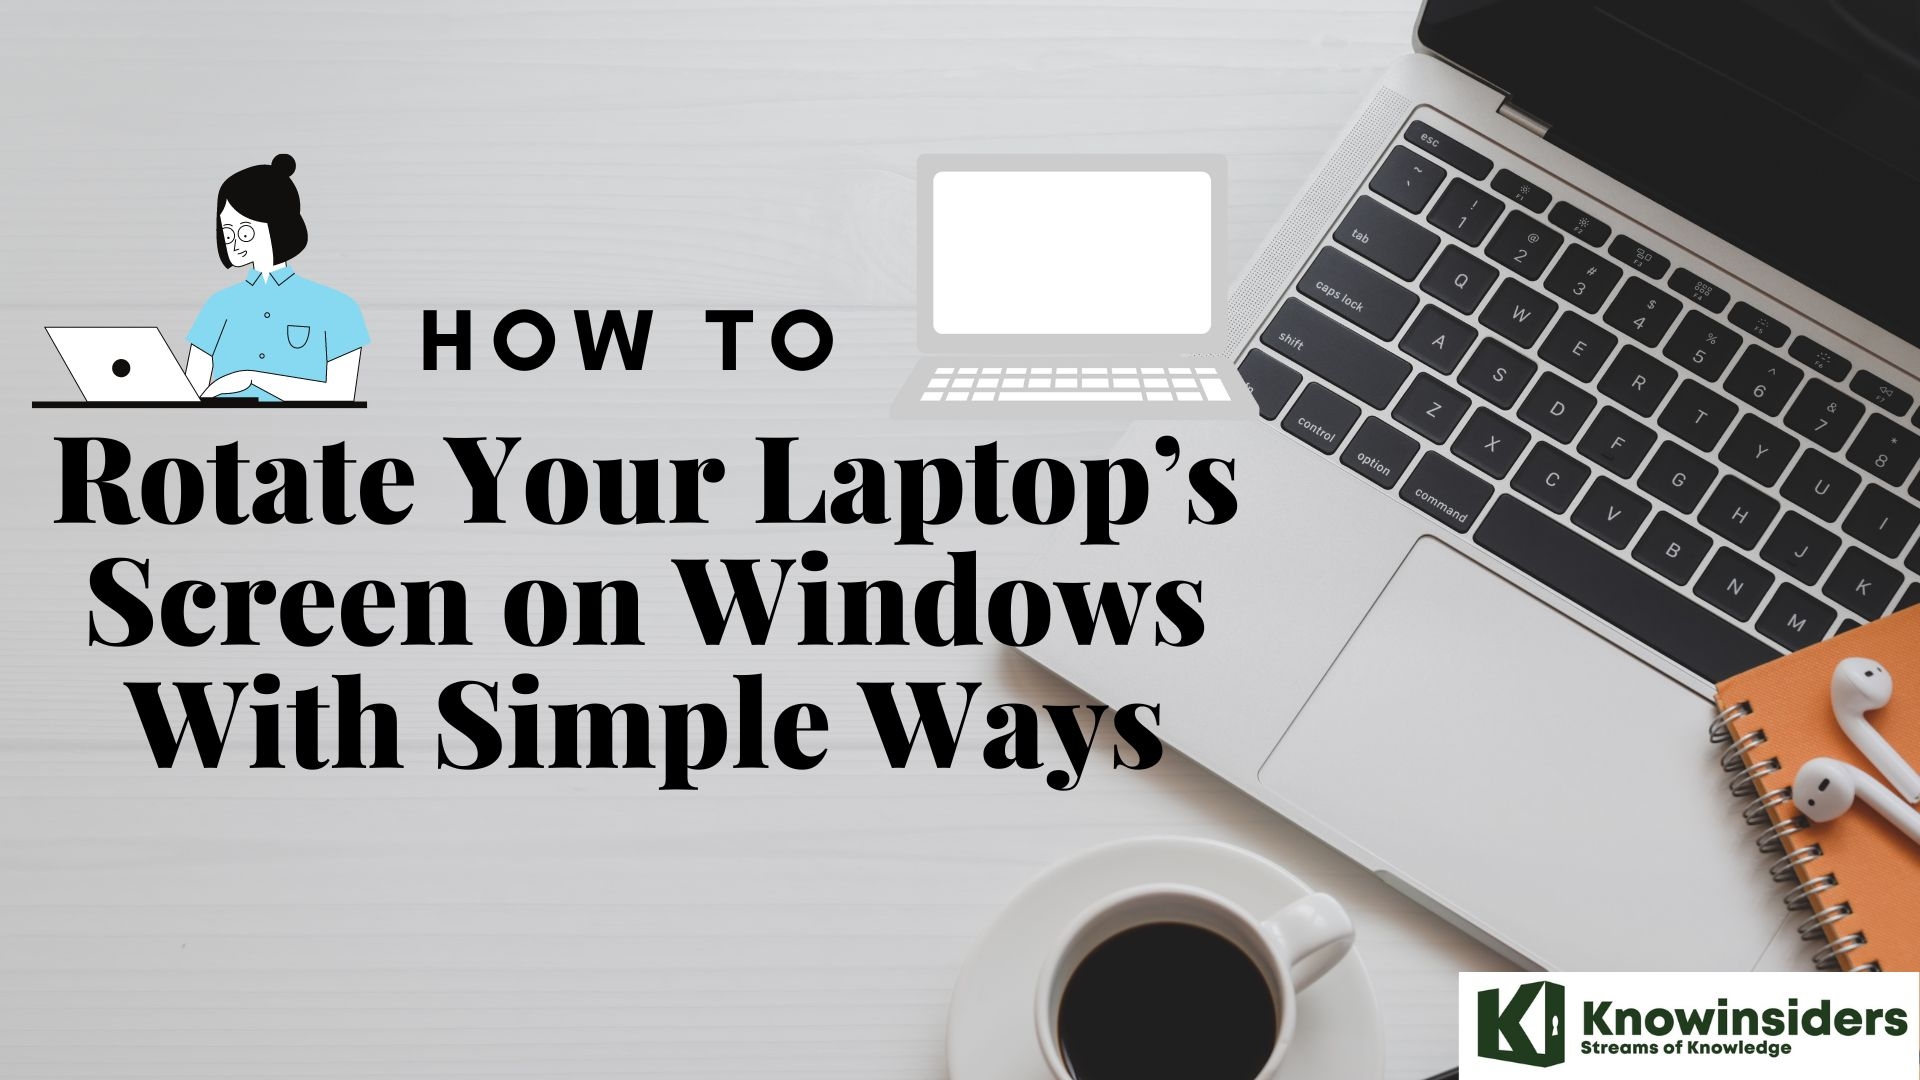 How to Rotate Your Laptop’s Screen on Windows With Simple Ways Knowinsiders.com